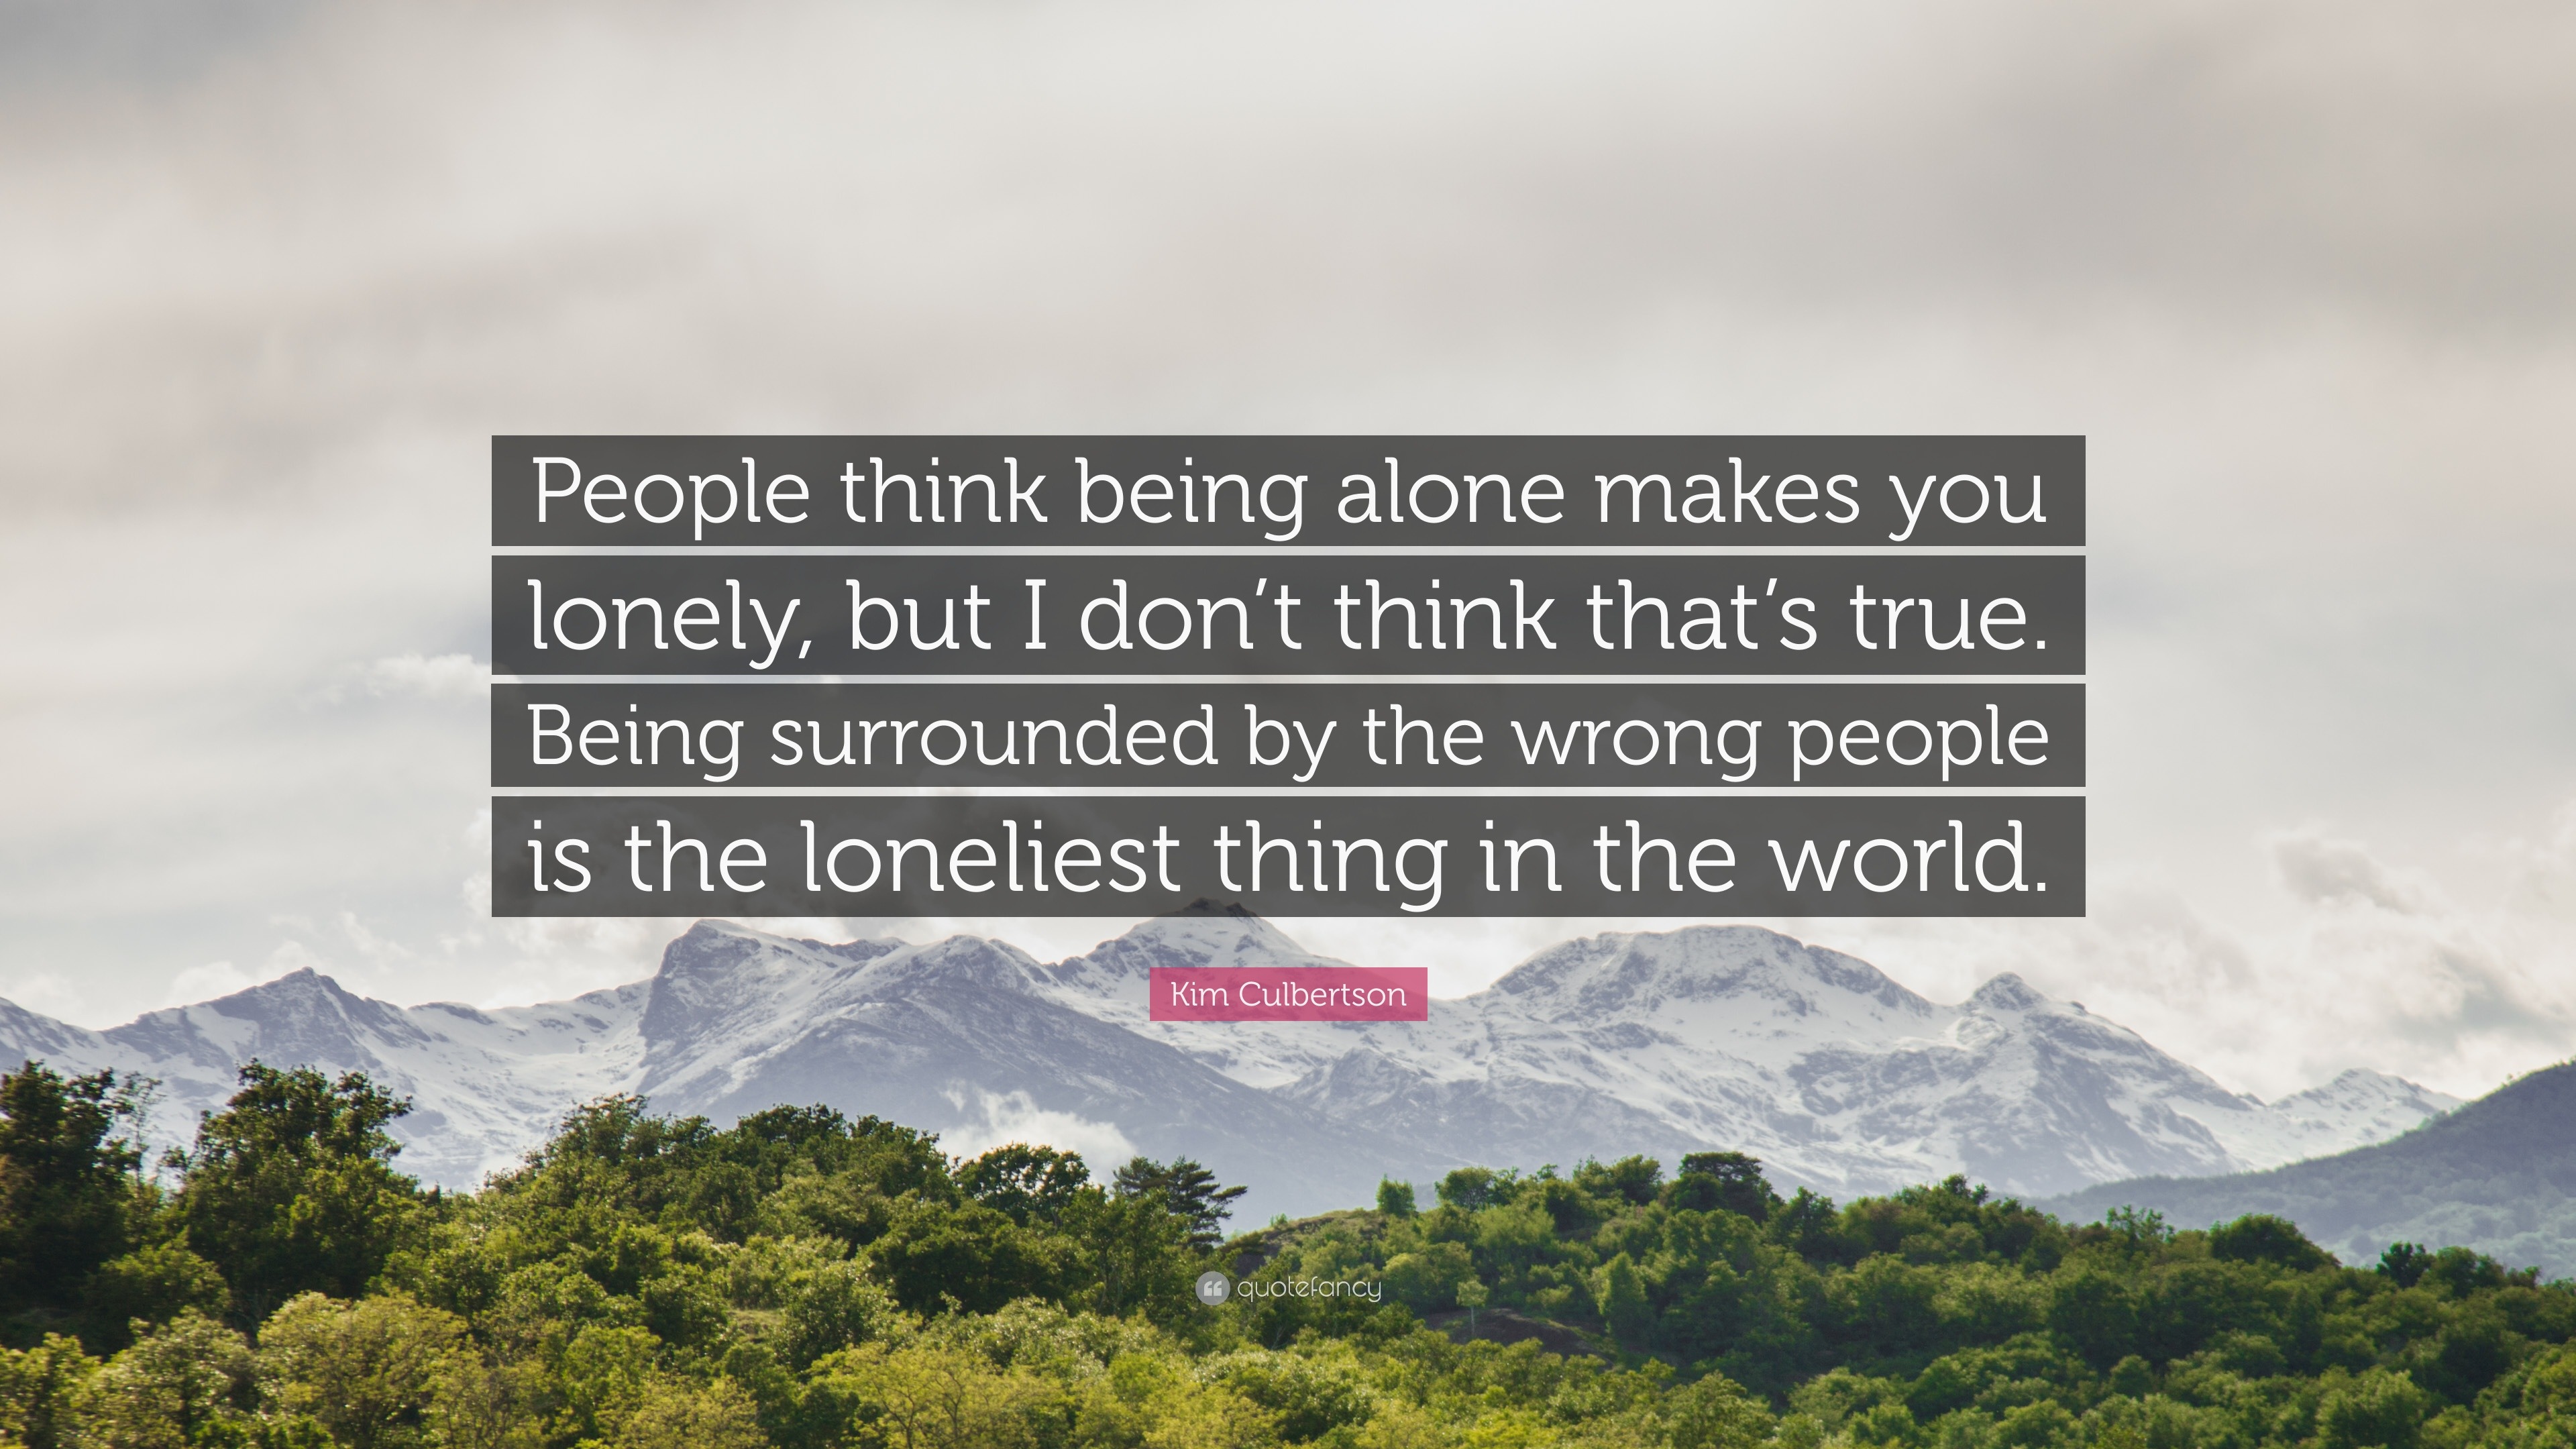 Kim Culbertson Quote: “People think being alone makes you lonely, but I ...